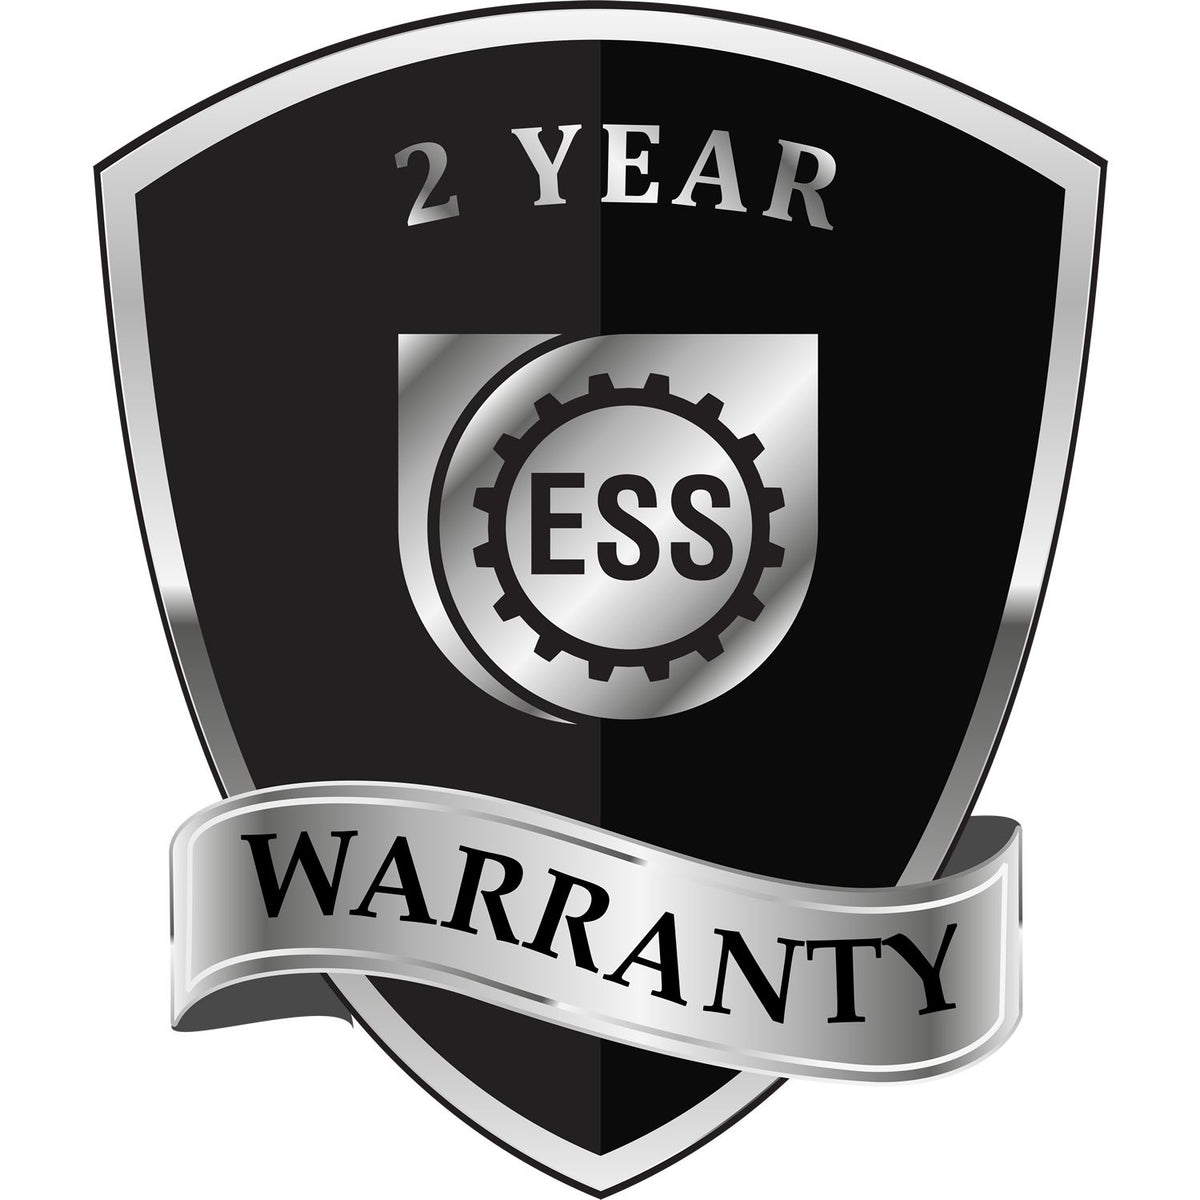 A black and silver badge or emblem showing warranty information for the Hybrid Washington Architect Seal